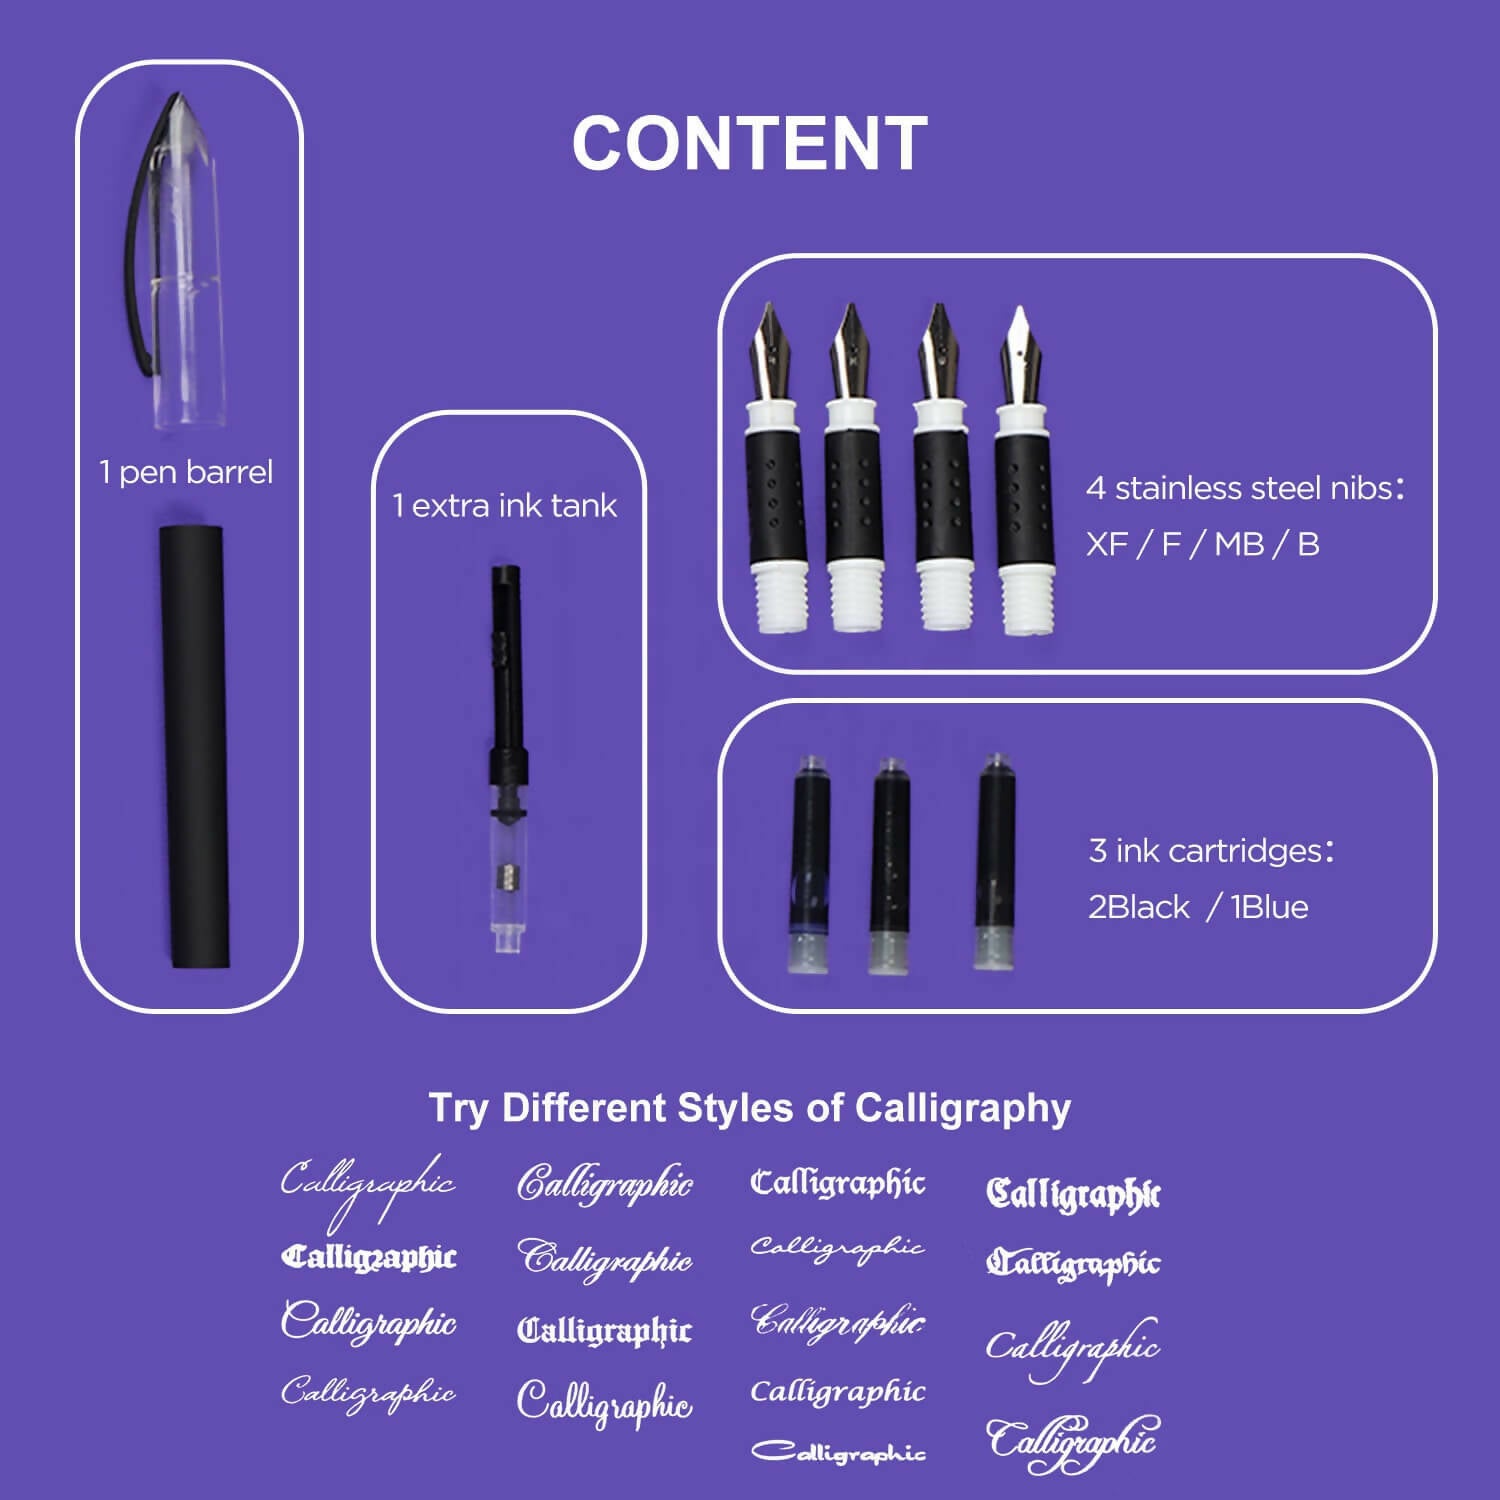 Keep Smiling Calligraphy Pen Set Calligraphy With 1pc Pen Holder & 4pcs Pen Nibs With 3pcs Inks